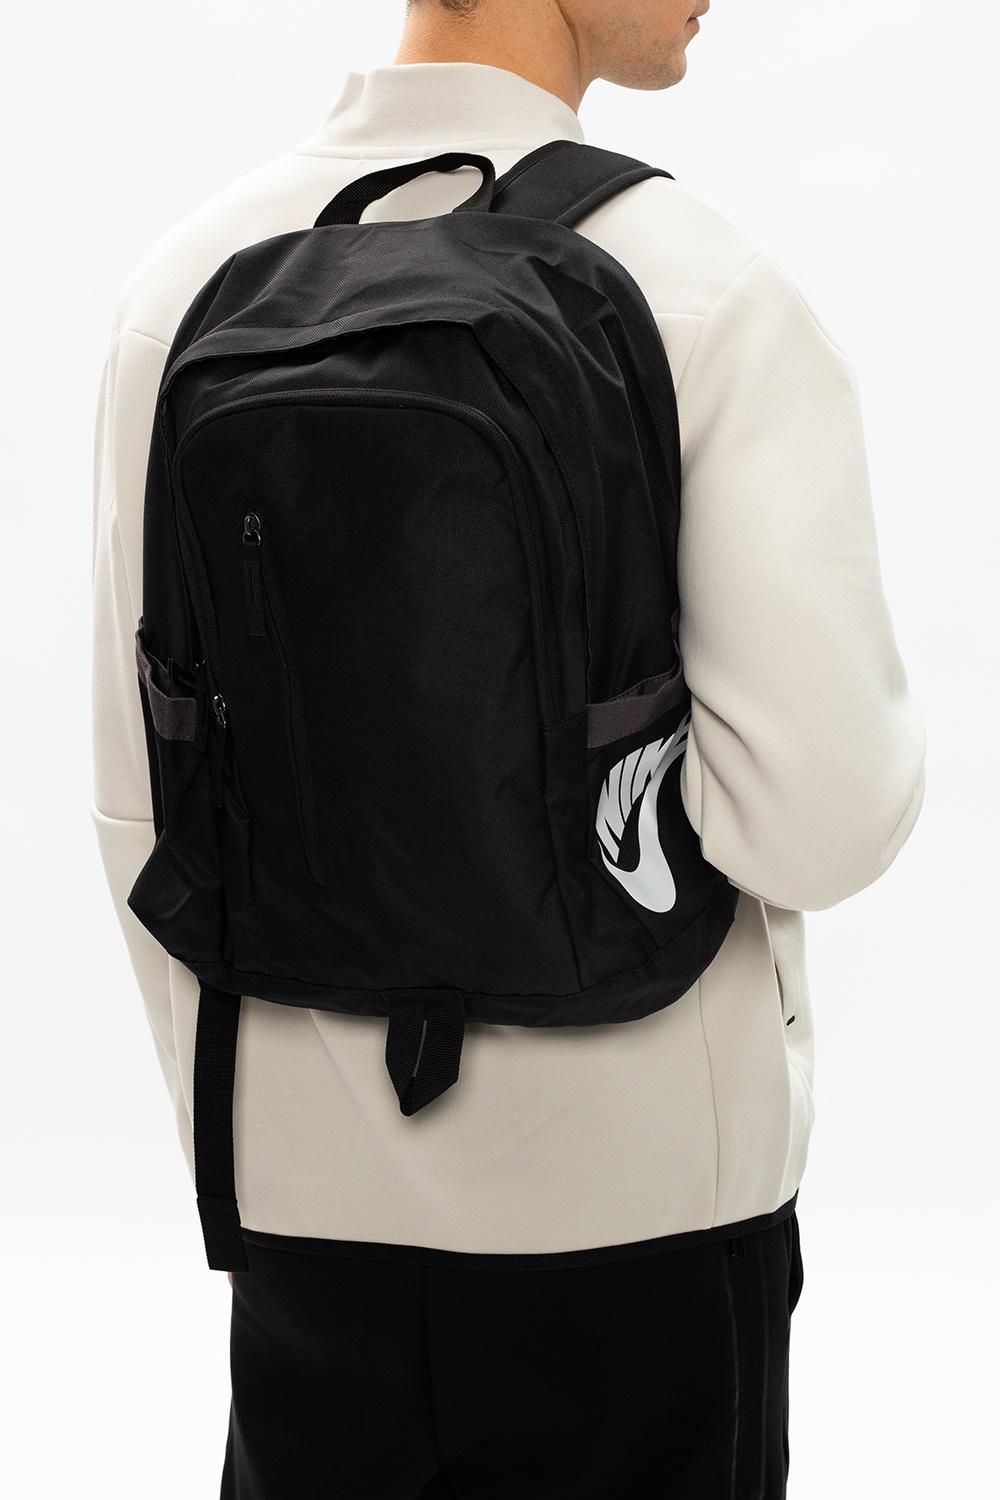 Nike Synthetic All Access Soleday Backpack in Black/White (Black) - Lyst